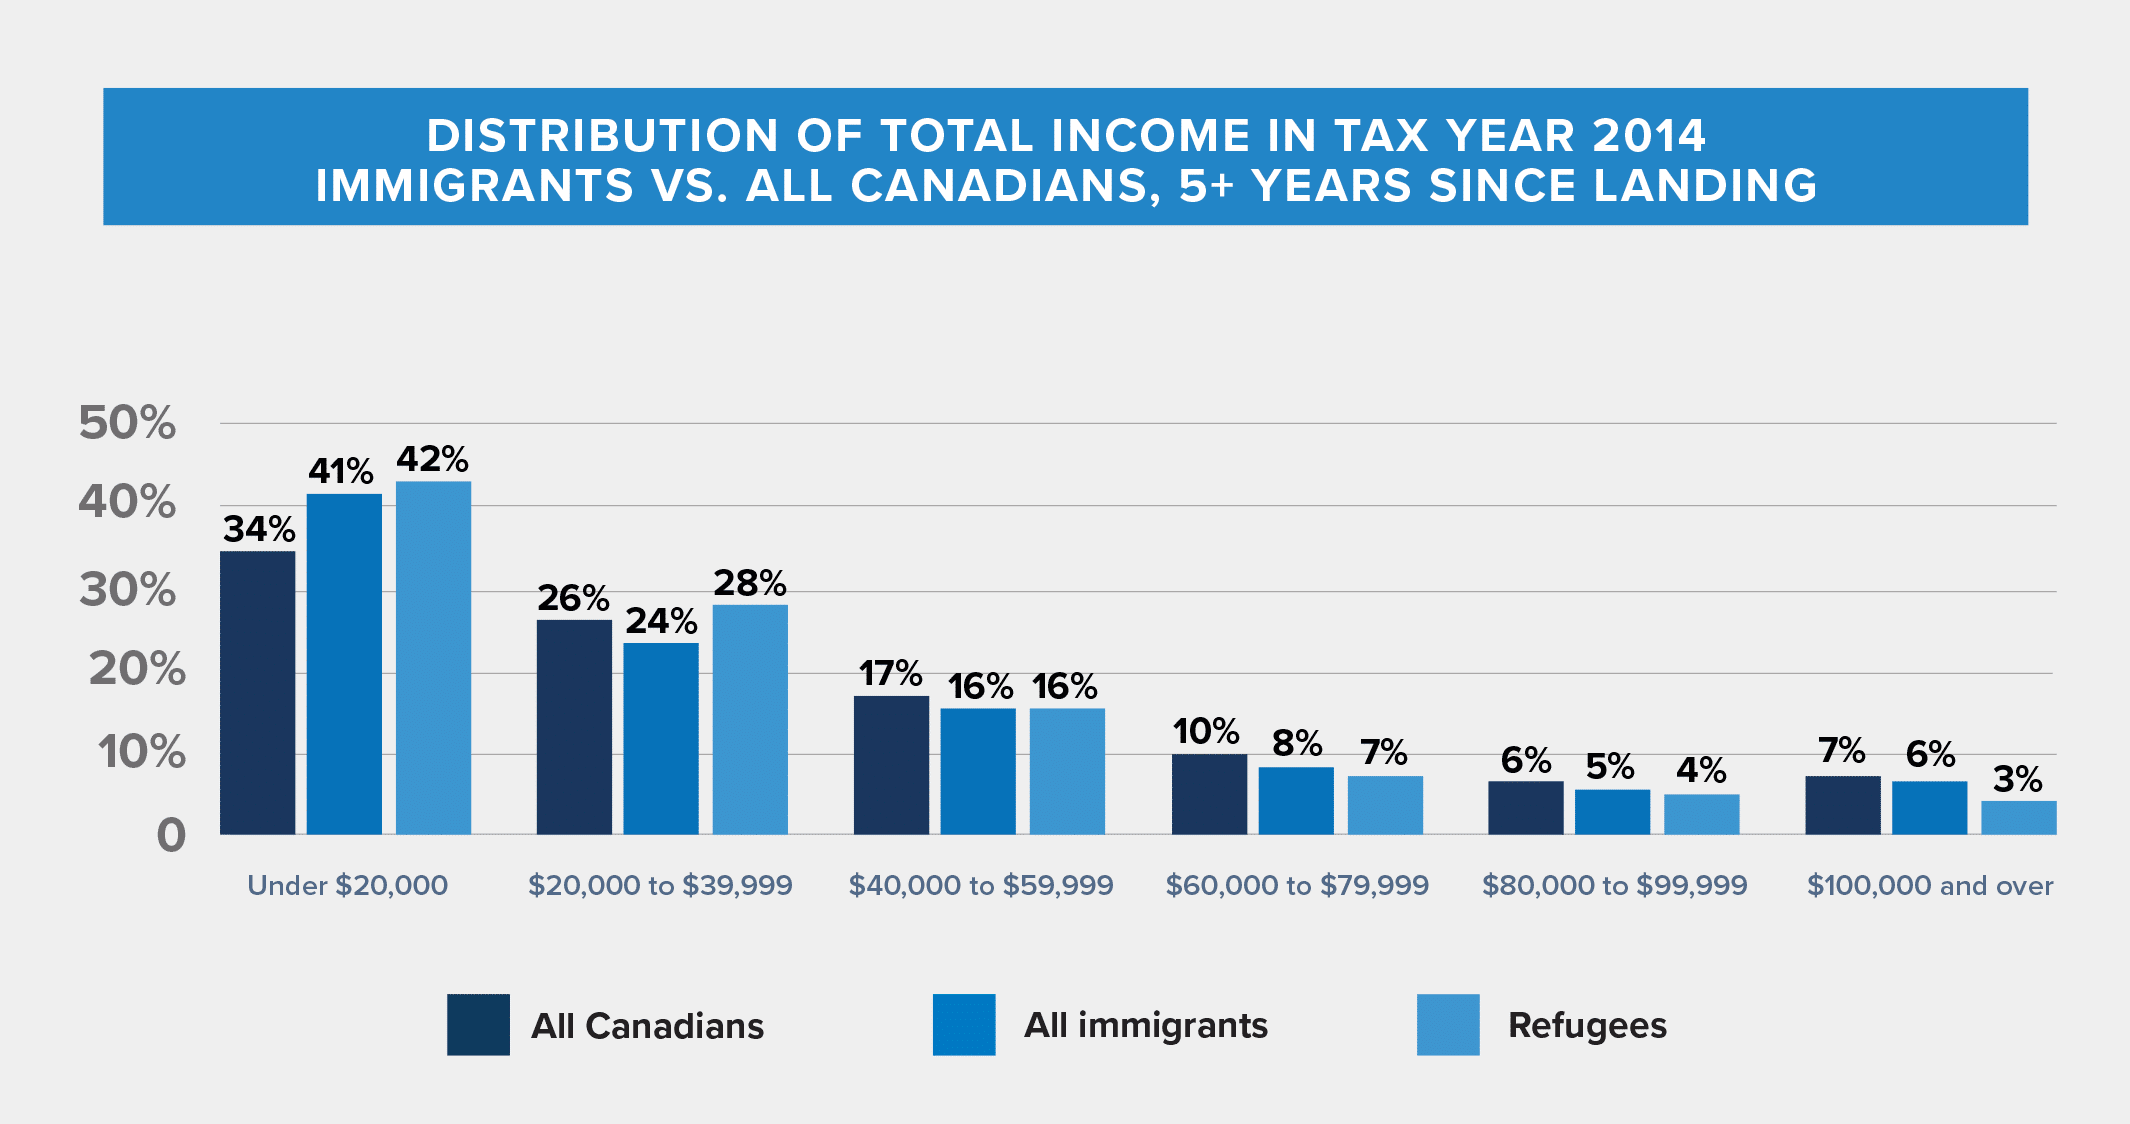 Graph showing income distribution for immigrants, at least five years after landing, versus all Canadians in tax year 2014.